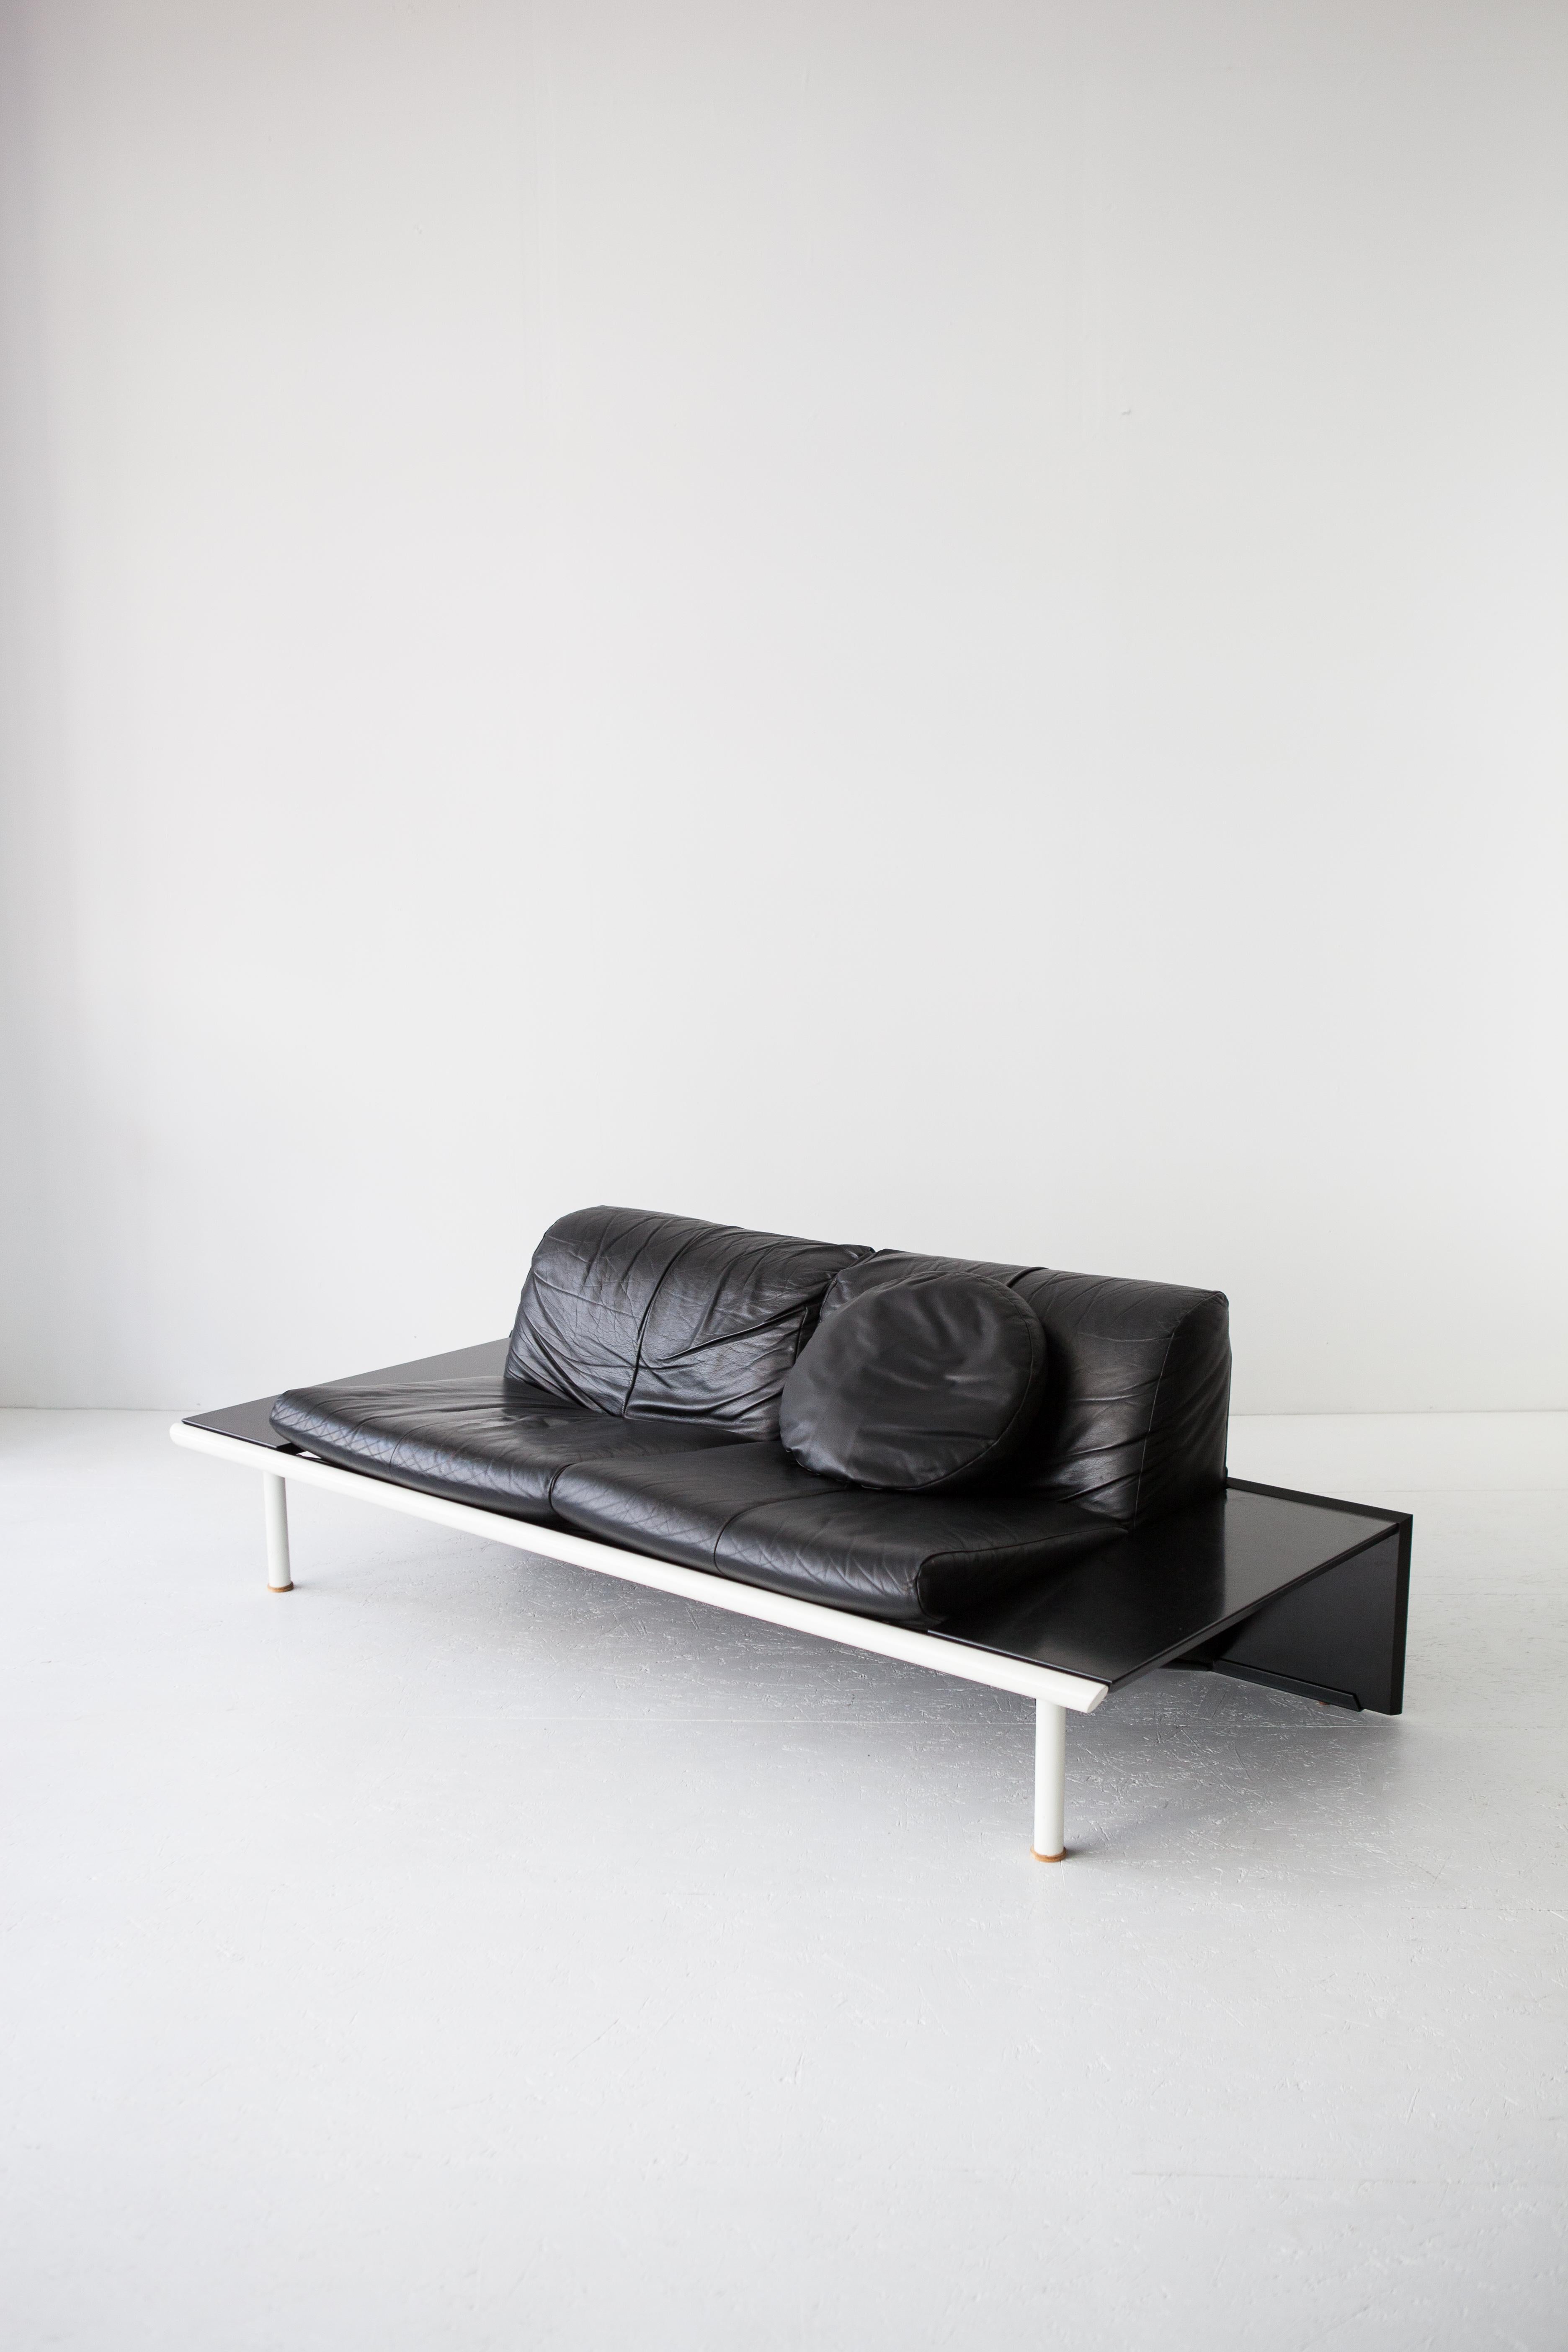 Mission sofa by Jack Crebolder for Harvink, 1980s

In the 1980s Jack Crebolder was active as a furniture designer for the Dutch manufacturer Harvink. Although Harvink released two designs by his hand, over the decades everybody seems to have